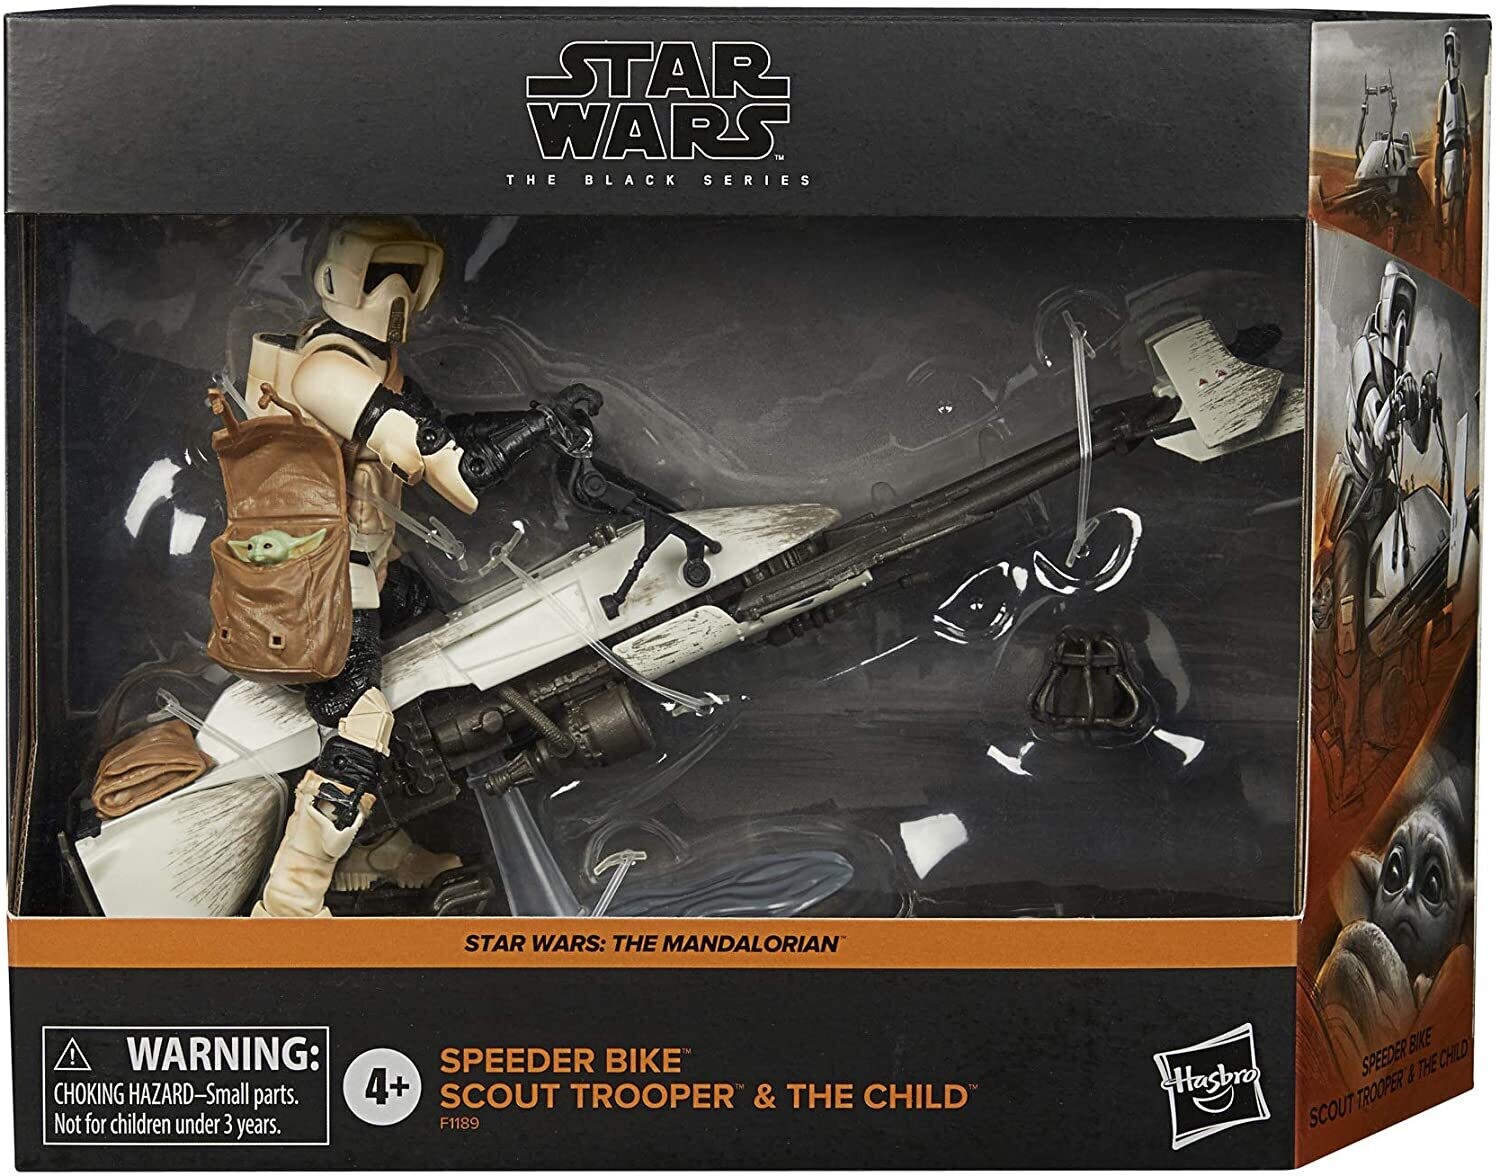 Star Wars The Black Series 6 inch Speeder Bike Scout Trooper and The Child  [sealed shipped case]